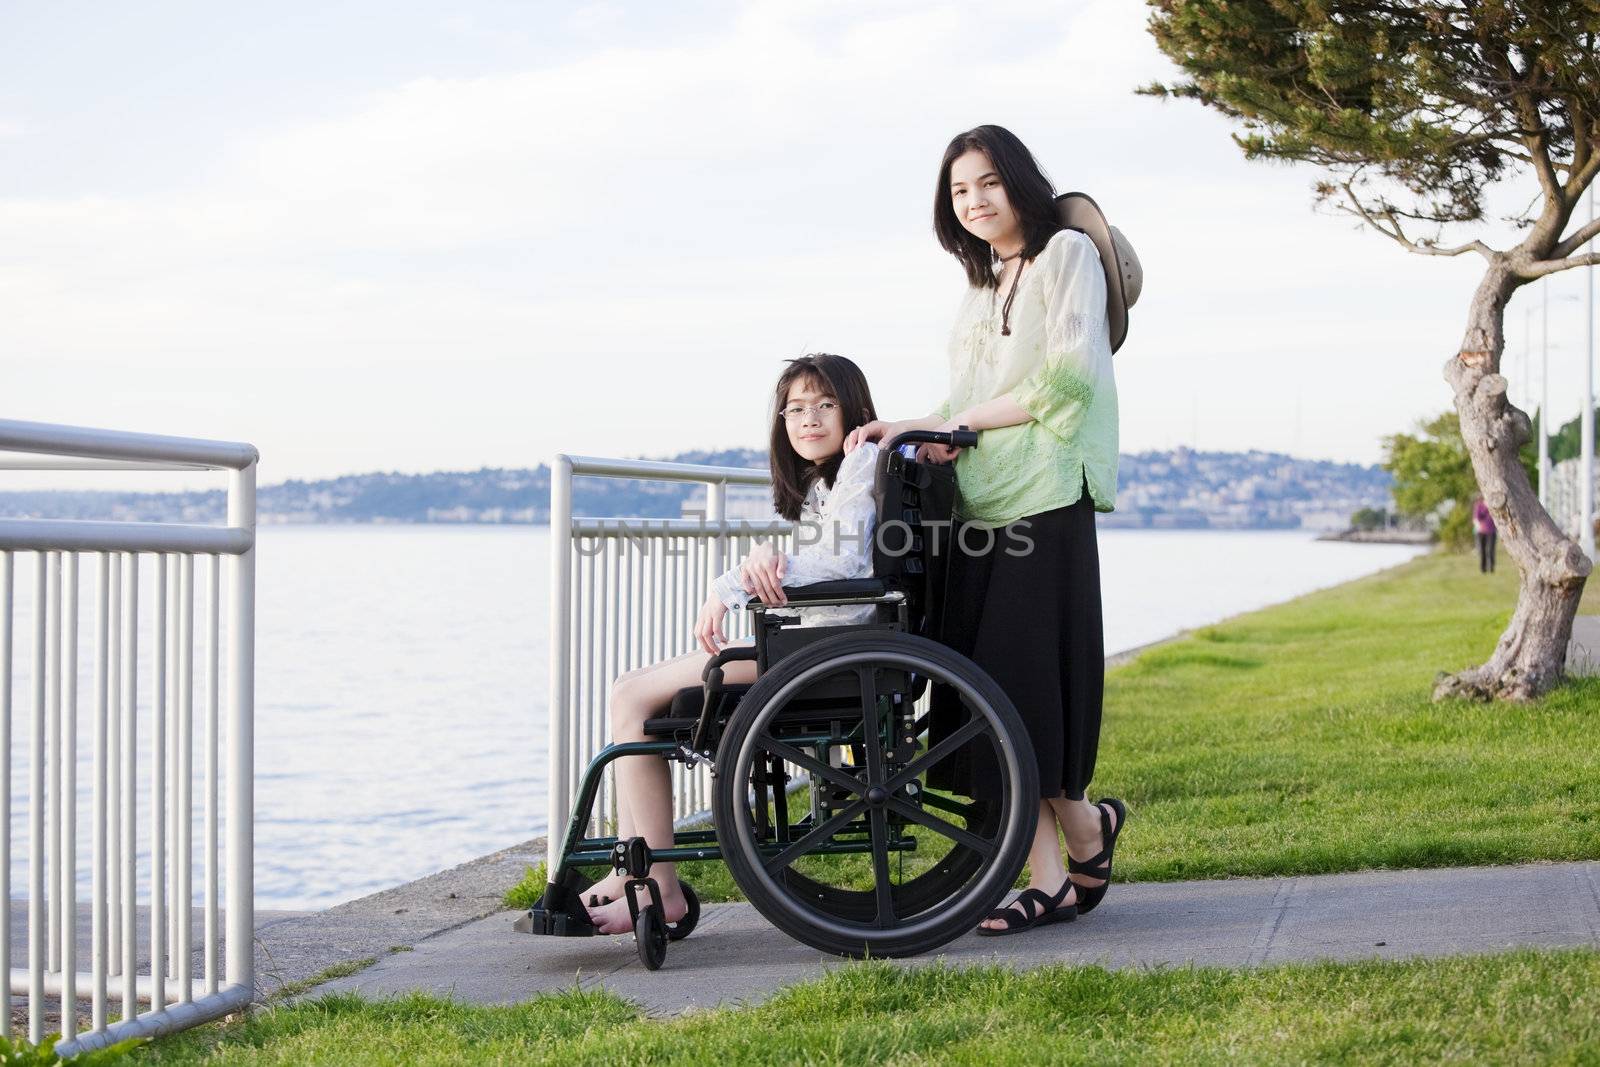 Taking care of sister in wheelchair by beach by jarenwicklund